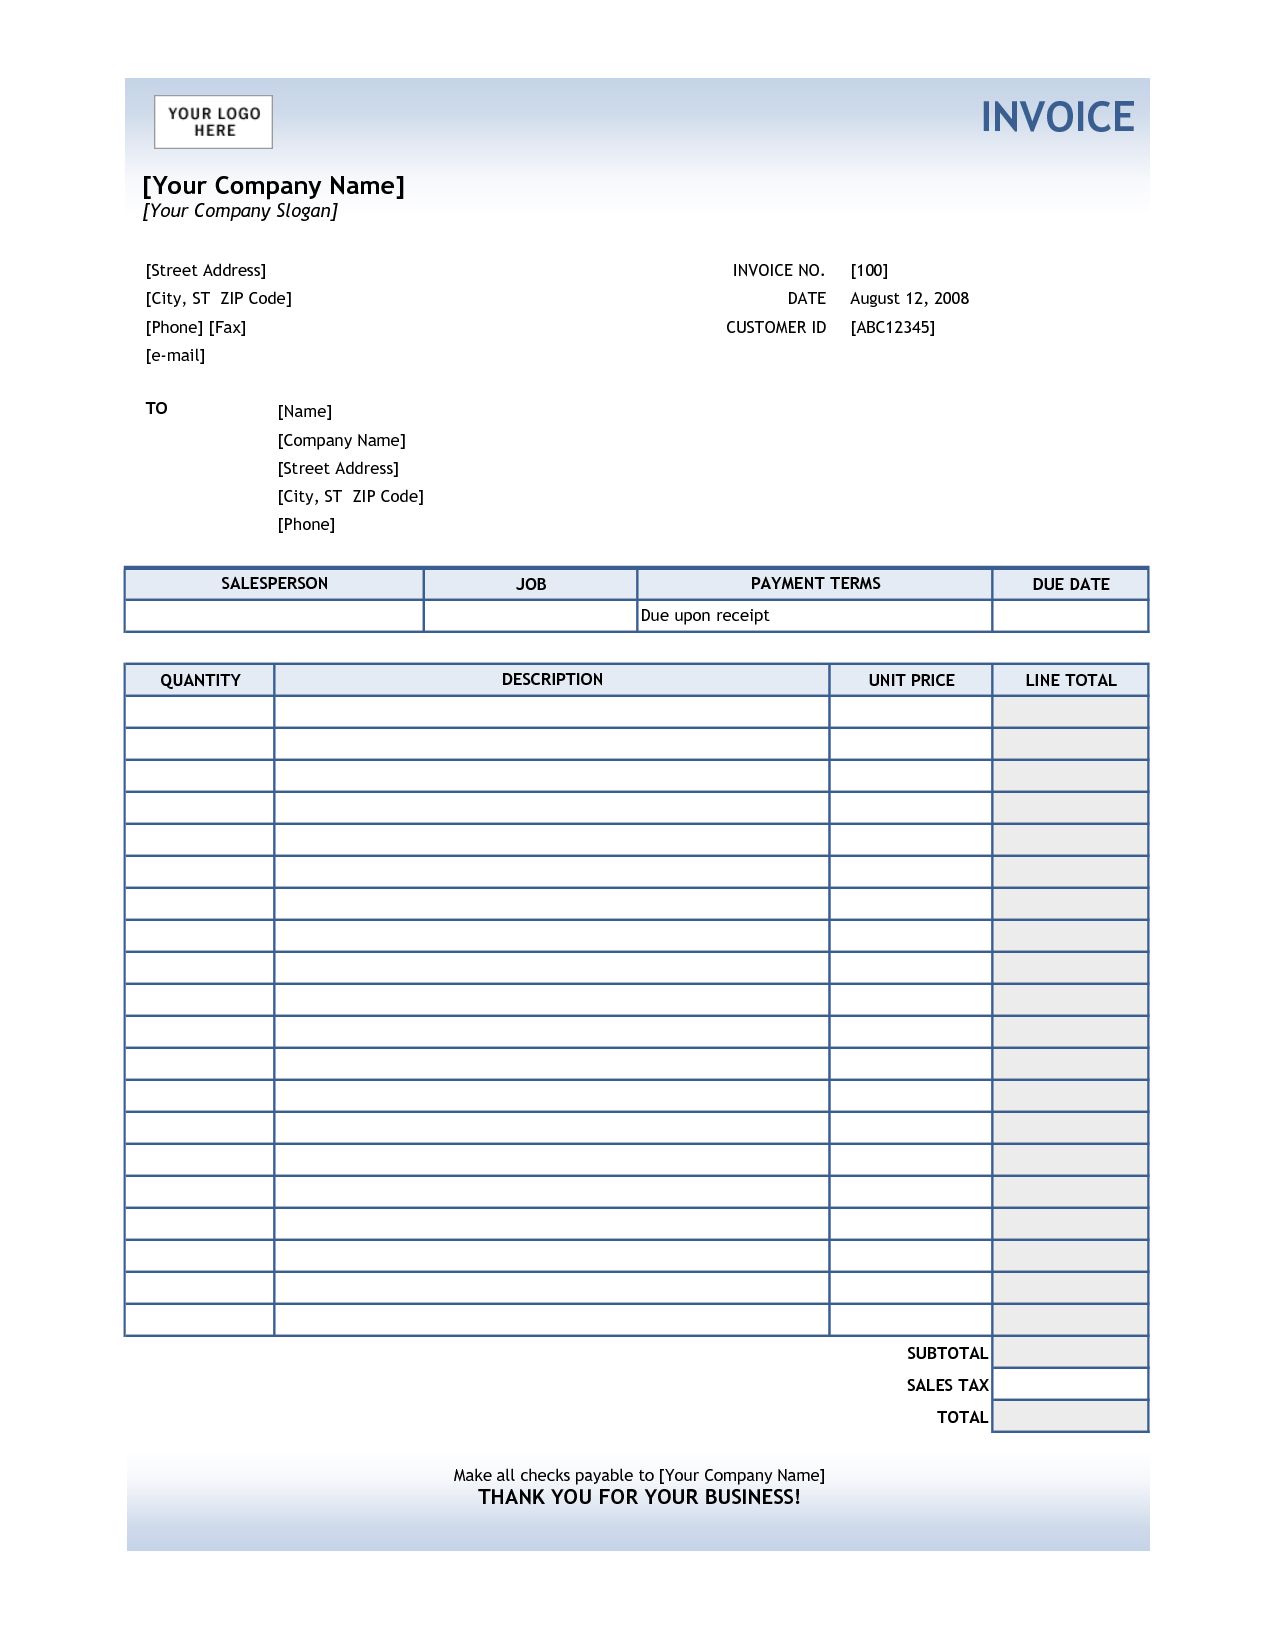 microsoft excel invoice template free